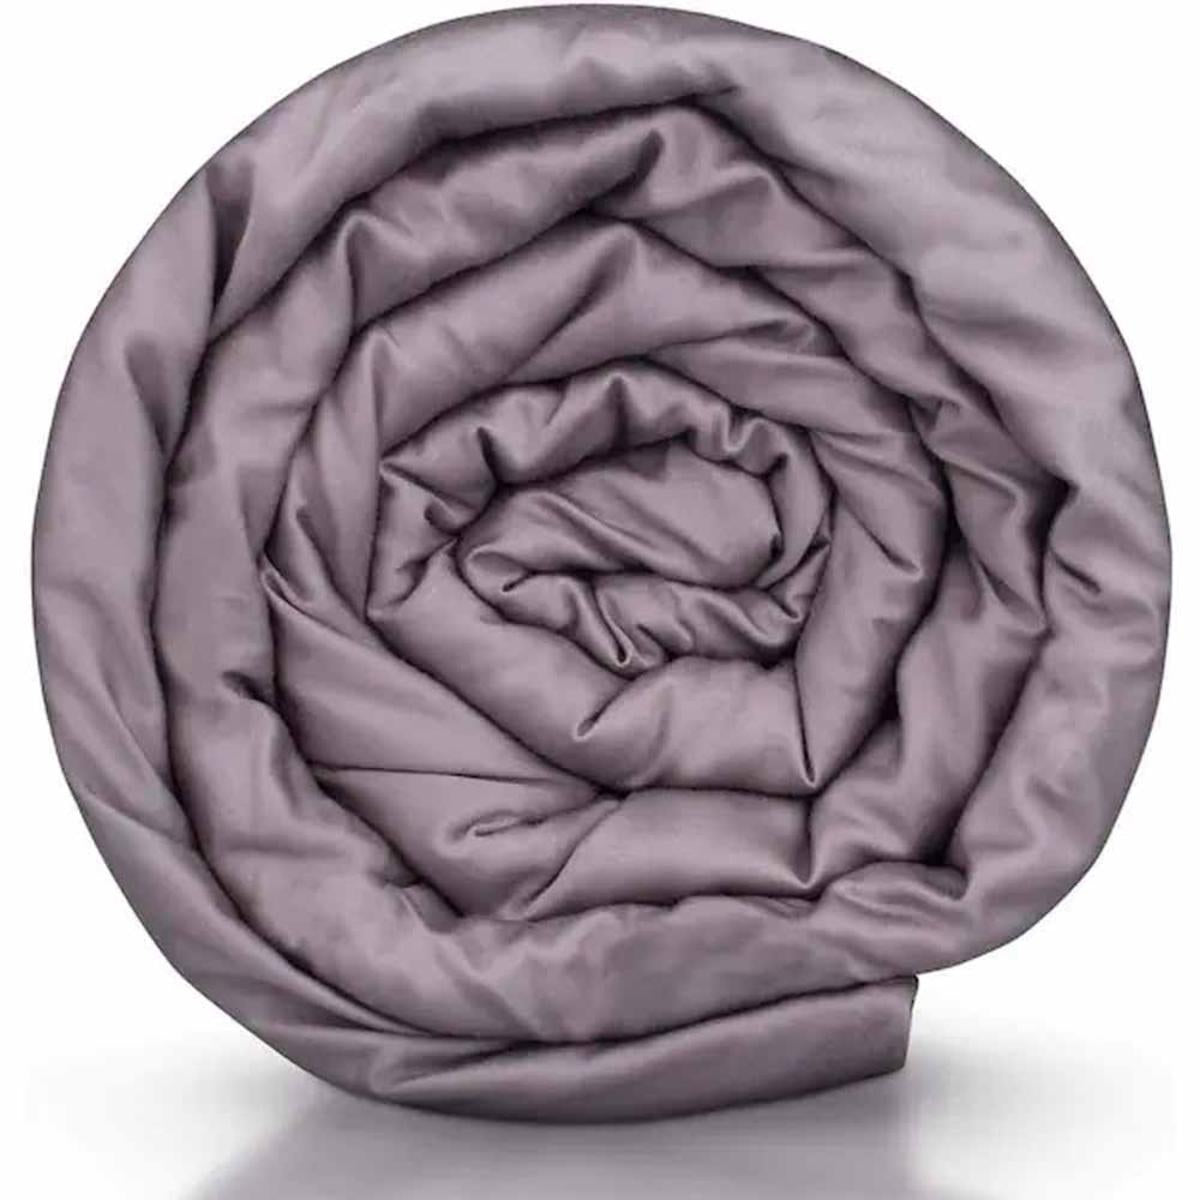 Hush Iced 2.0 20 lb Cooling Weighted Blanket for Hot Sleepers - Queen/80x87